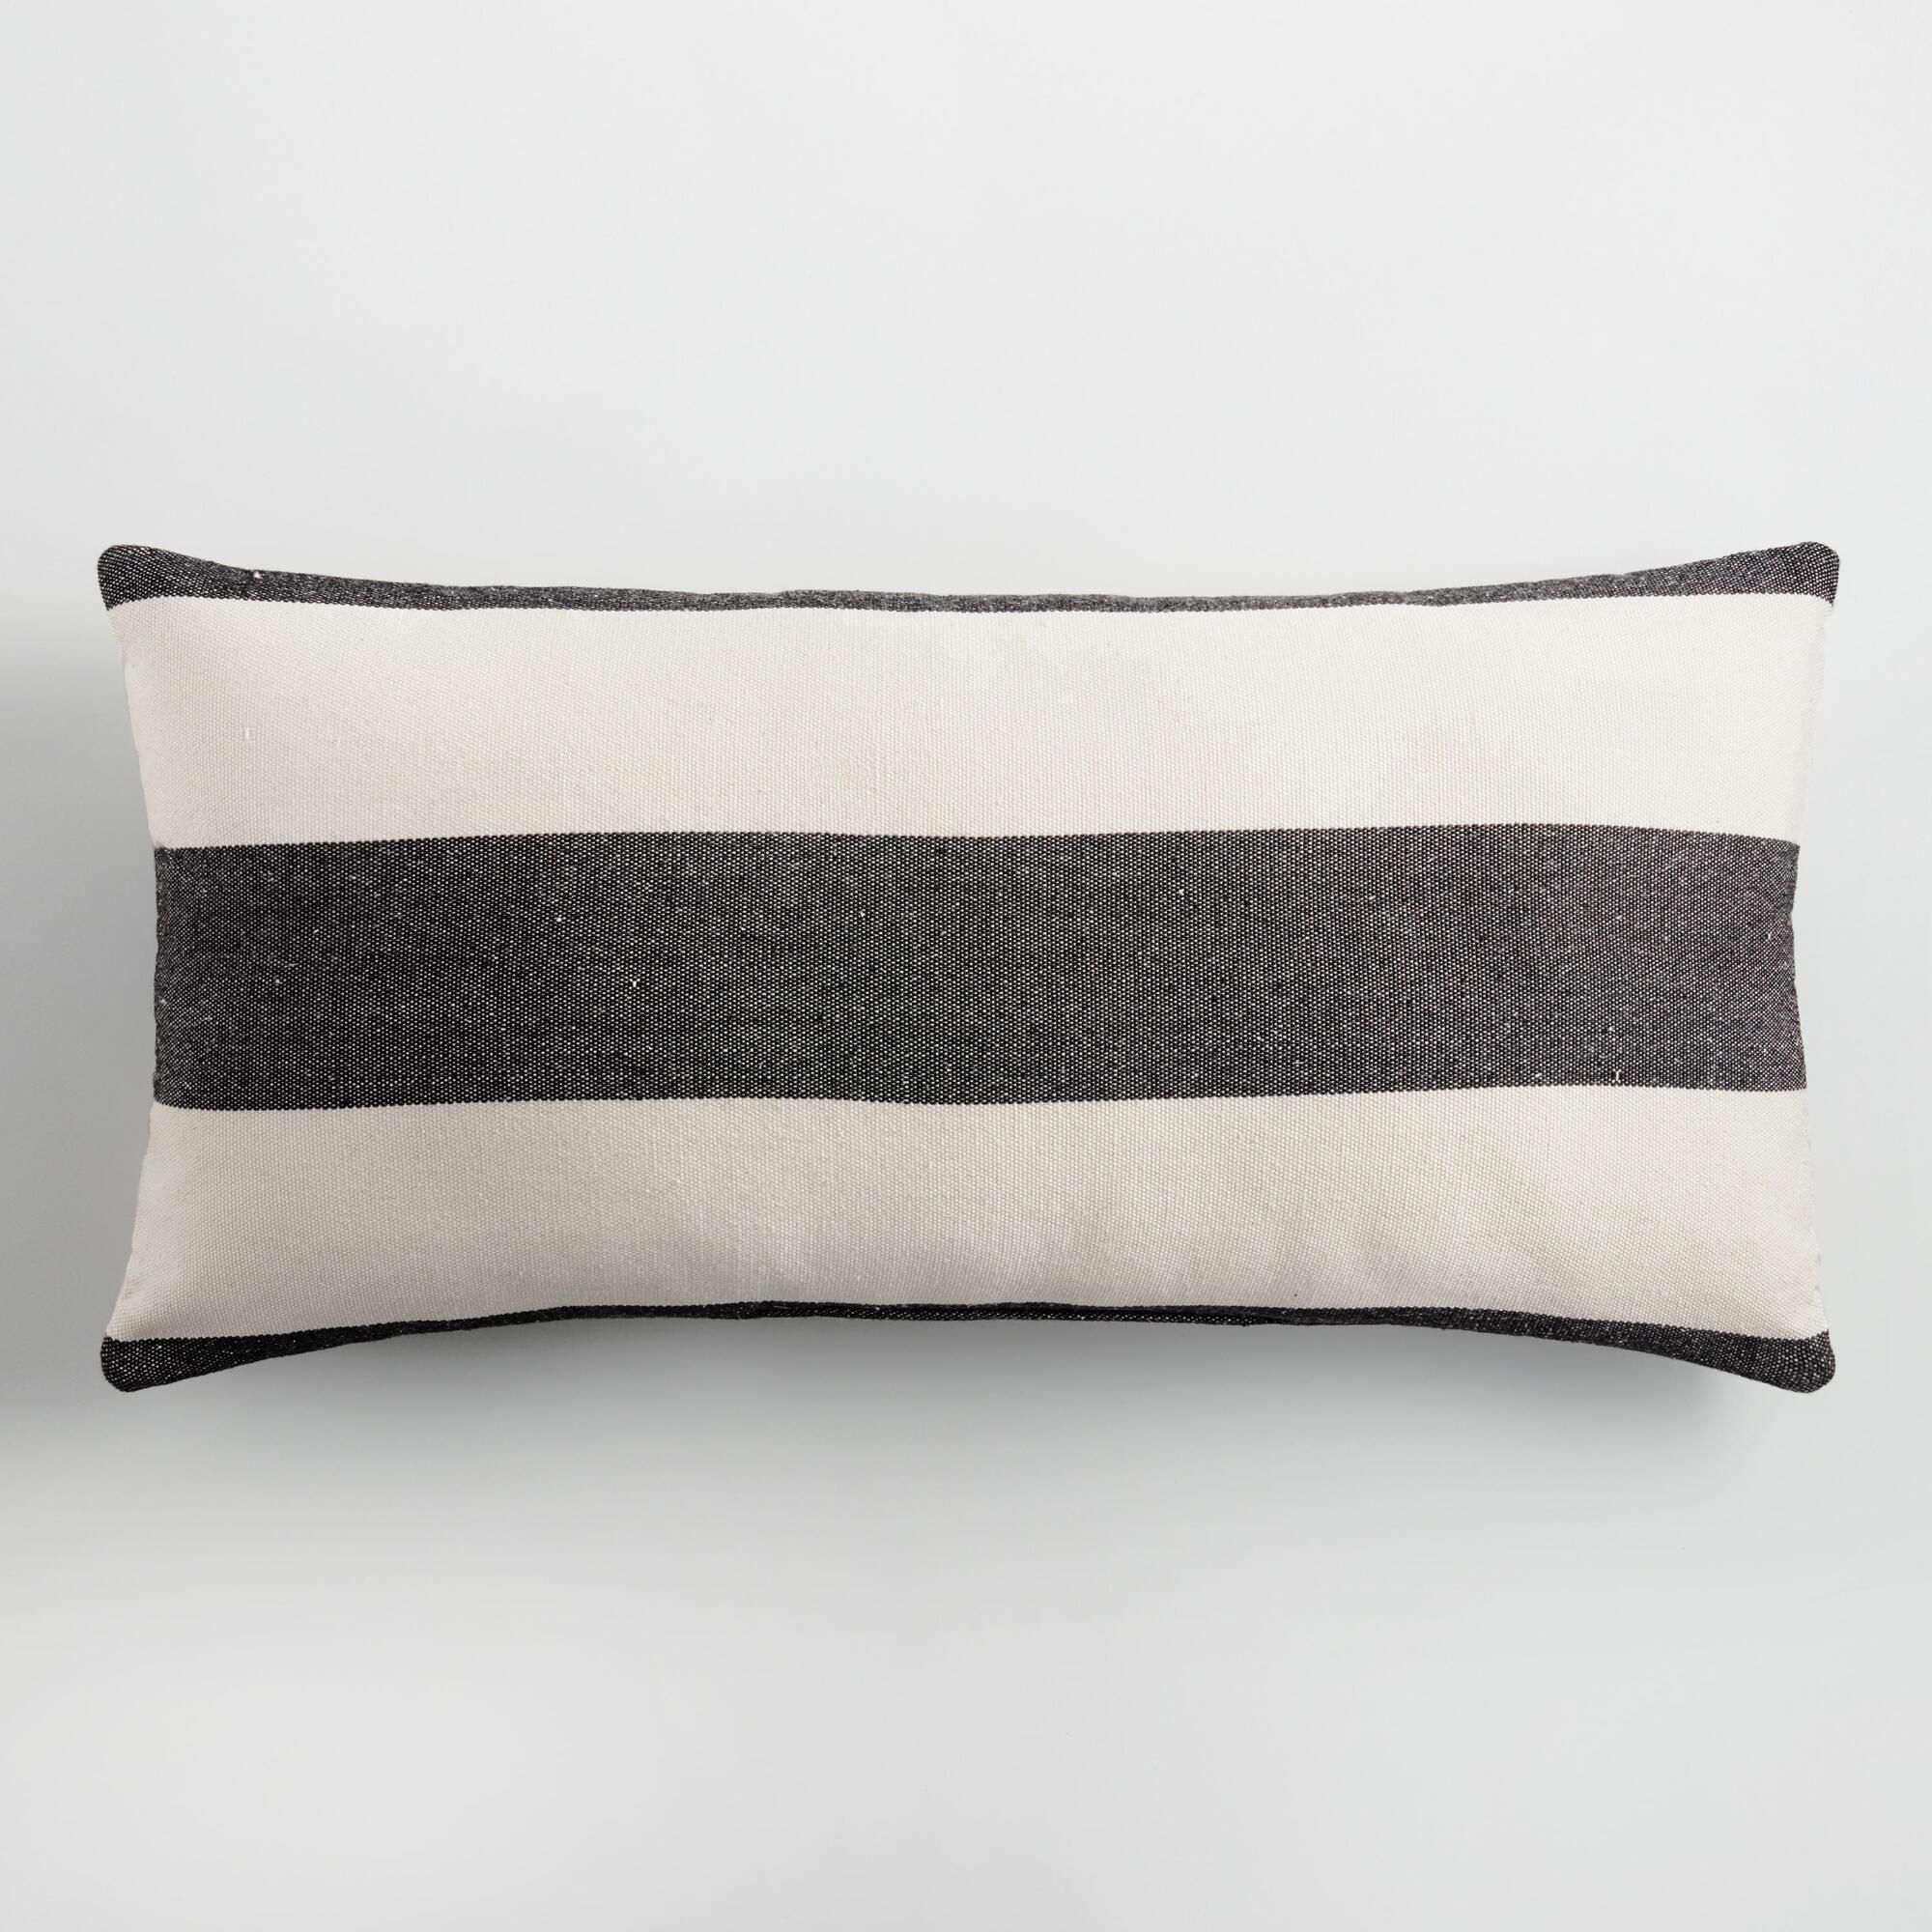 Black and White Striped Indoor Outdoor Patio Lumbar Pillow by World Market | World Market